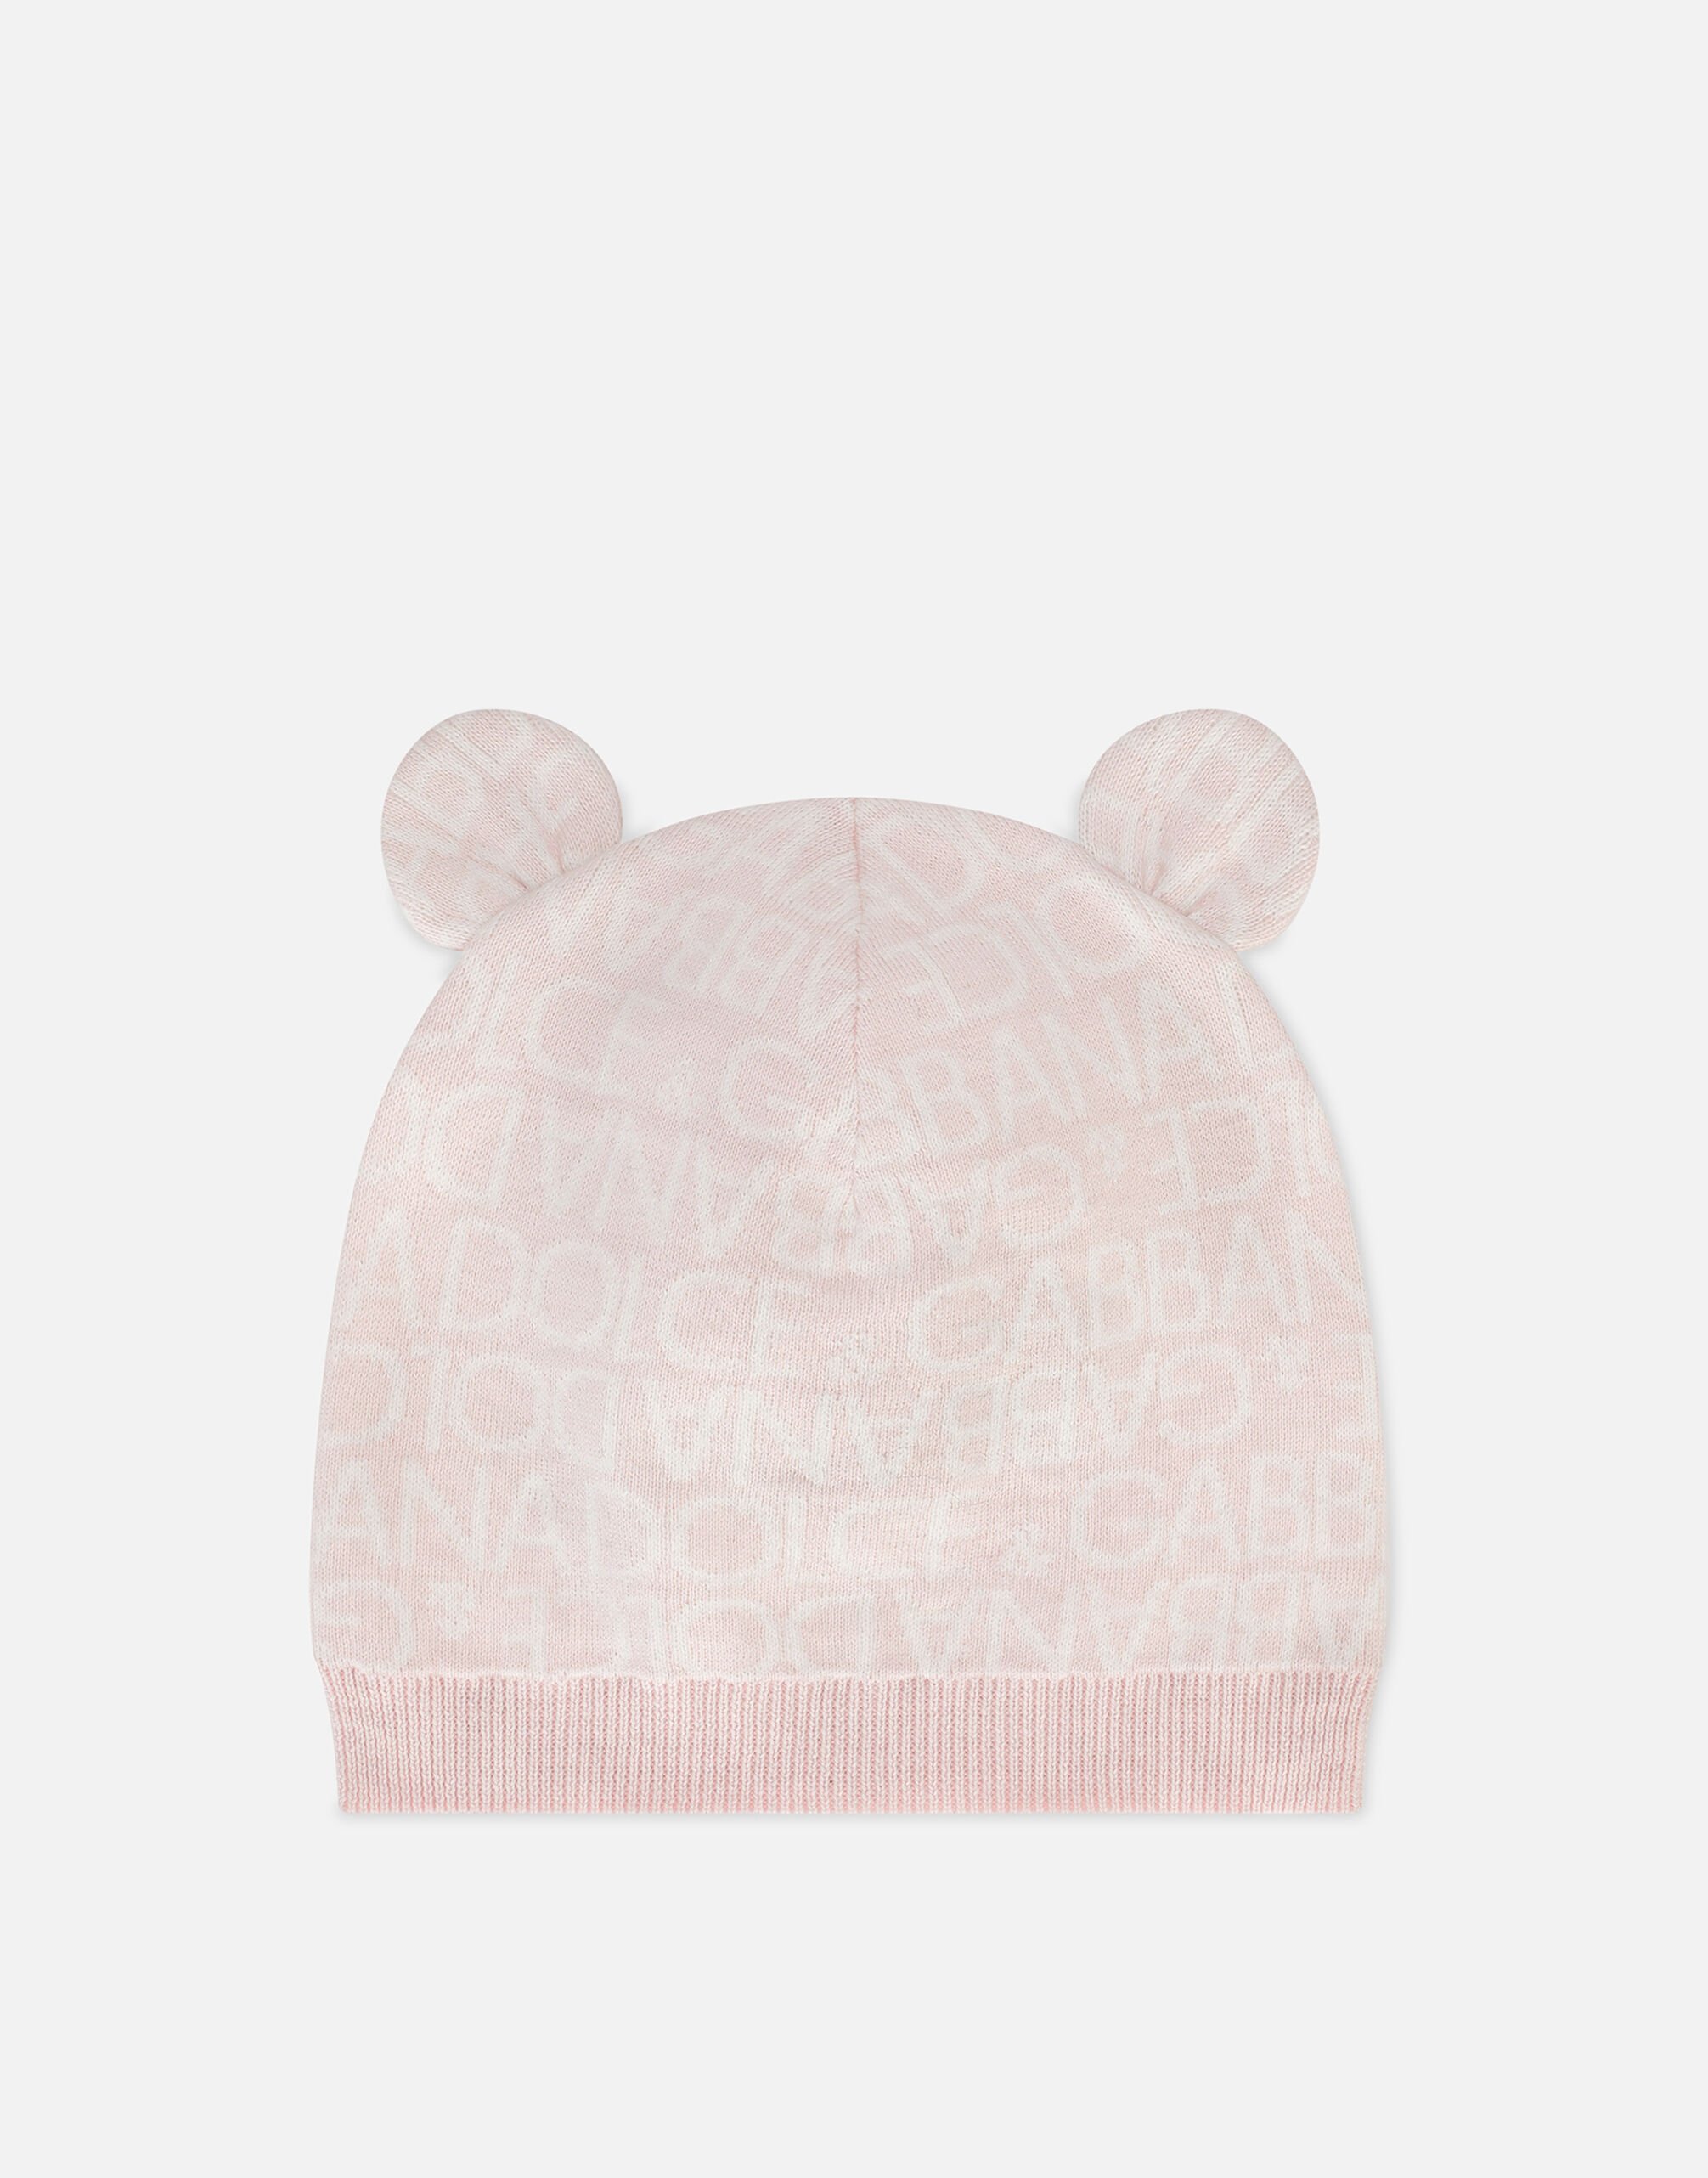 ${brand} Knit hat with jacquard logo and ears ${colorDescription} ${masterID}